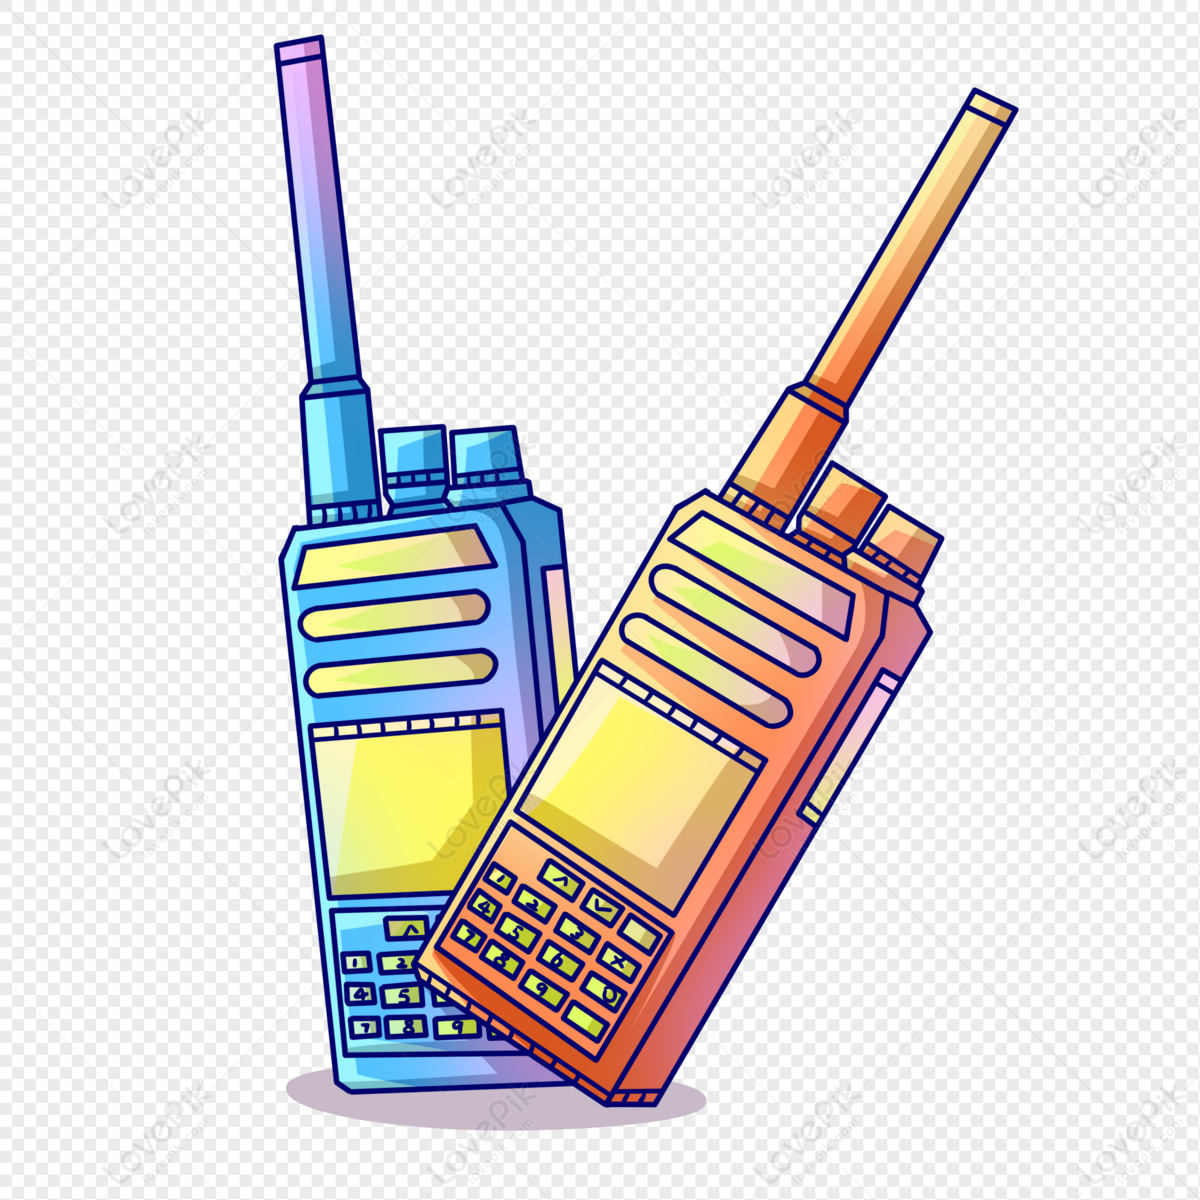 Cartoon Walkie Talkie PNG Transparent Image And Clipart Image For Free  Download - Lovepik | 401483507